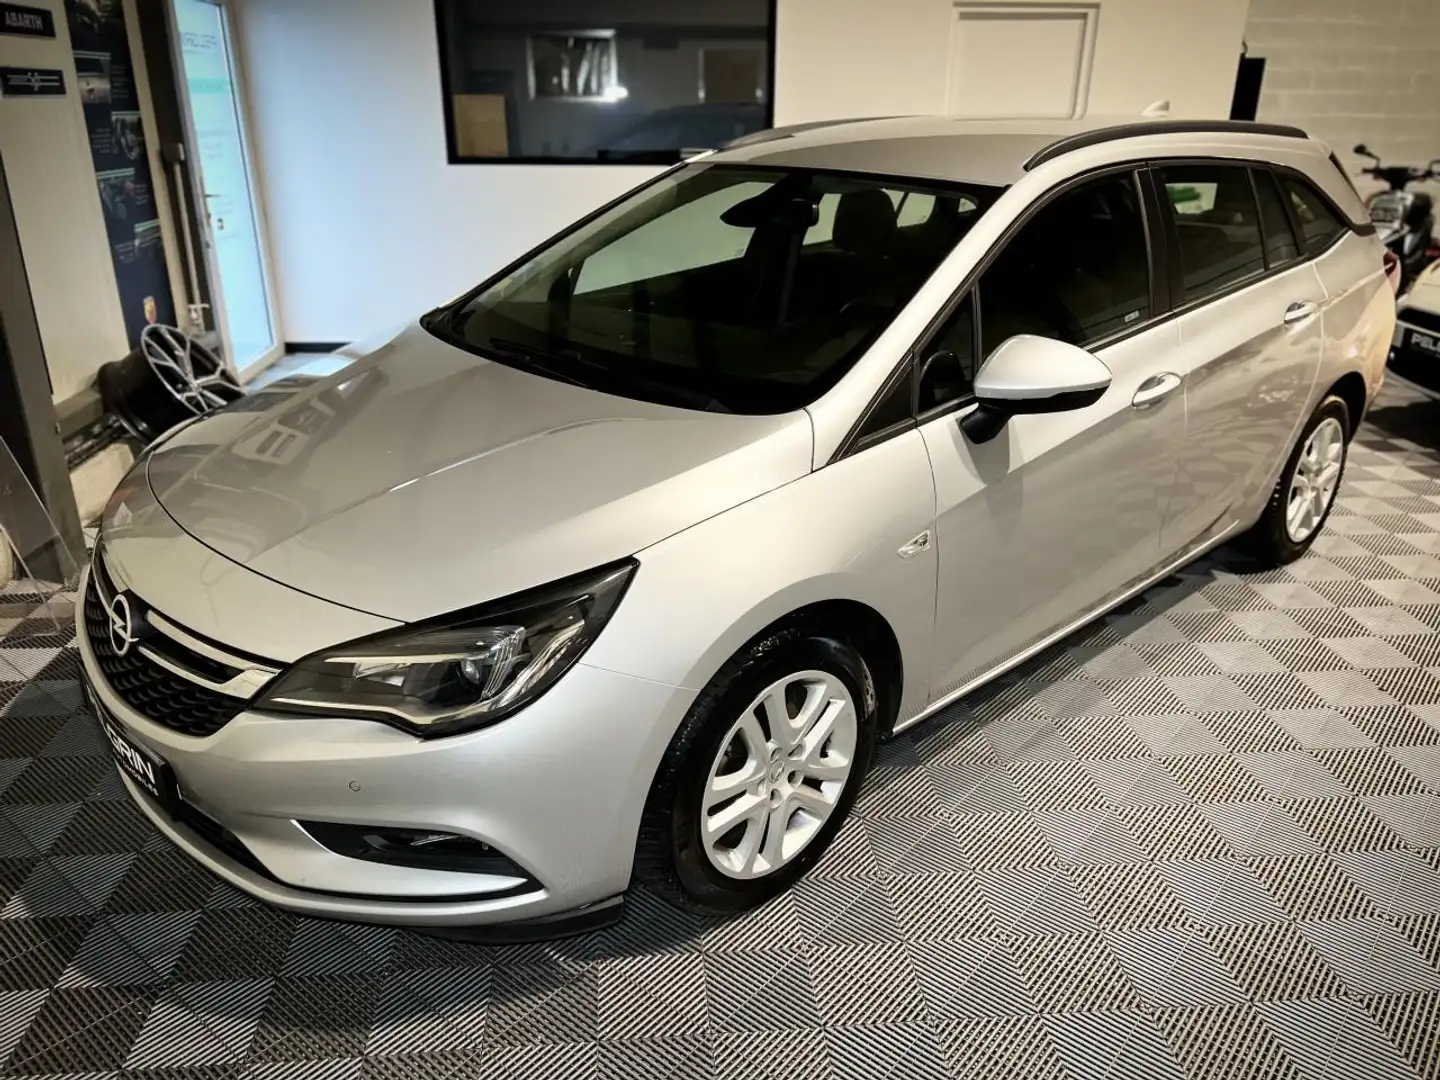 Opel Astra Sports Tourer 1.6 Cdti 110 Ch finition Edition - S Szary - 1